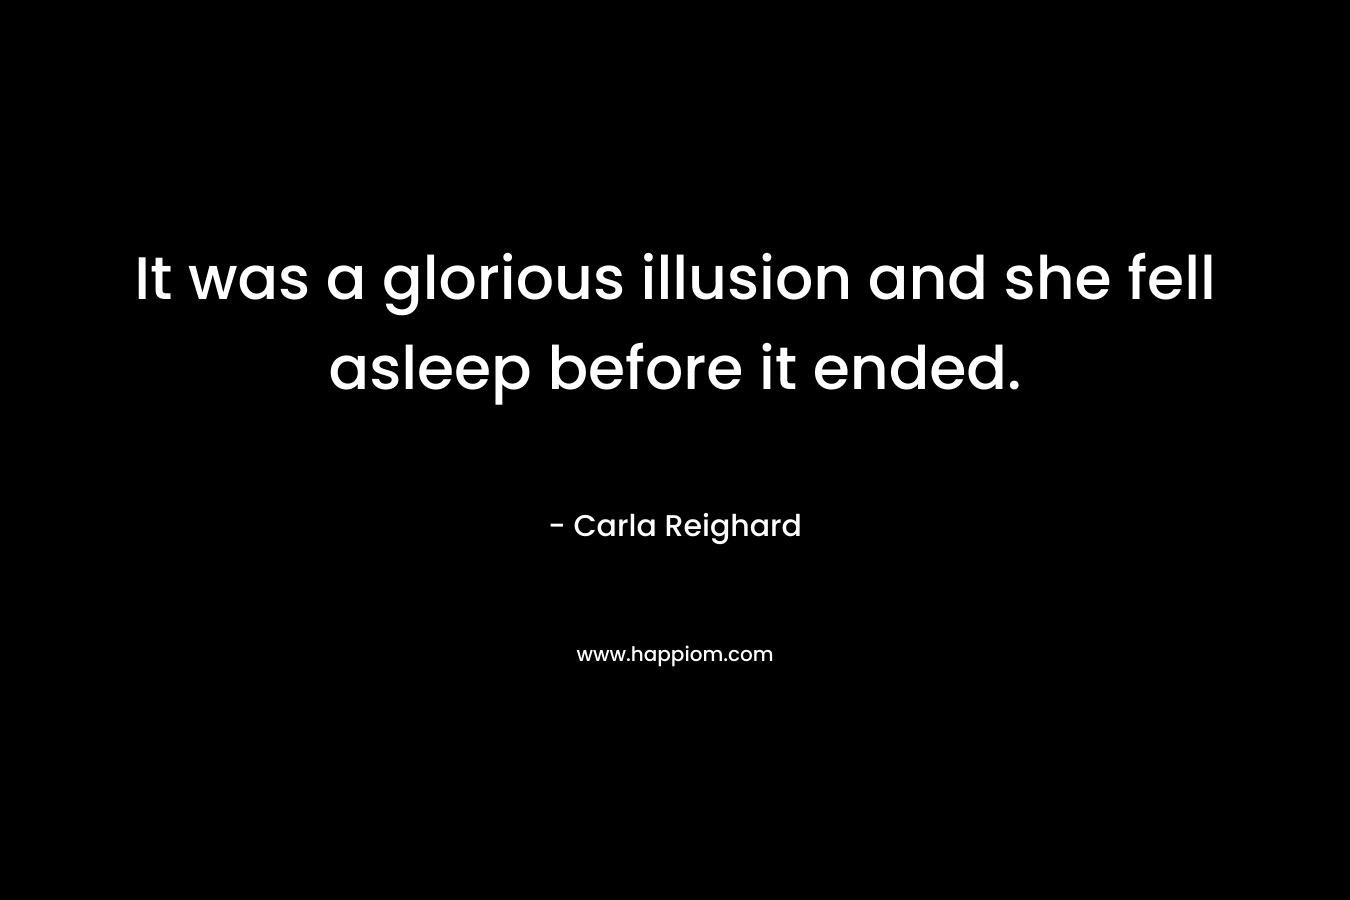 It was a glorious illusion and she fell asleep before it ended. – Carla Reighard